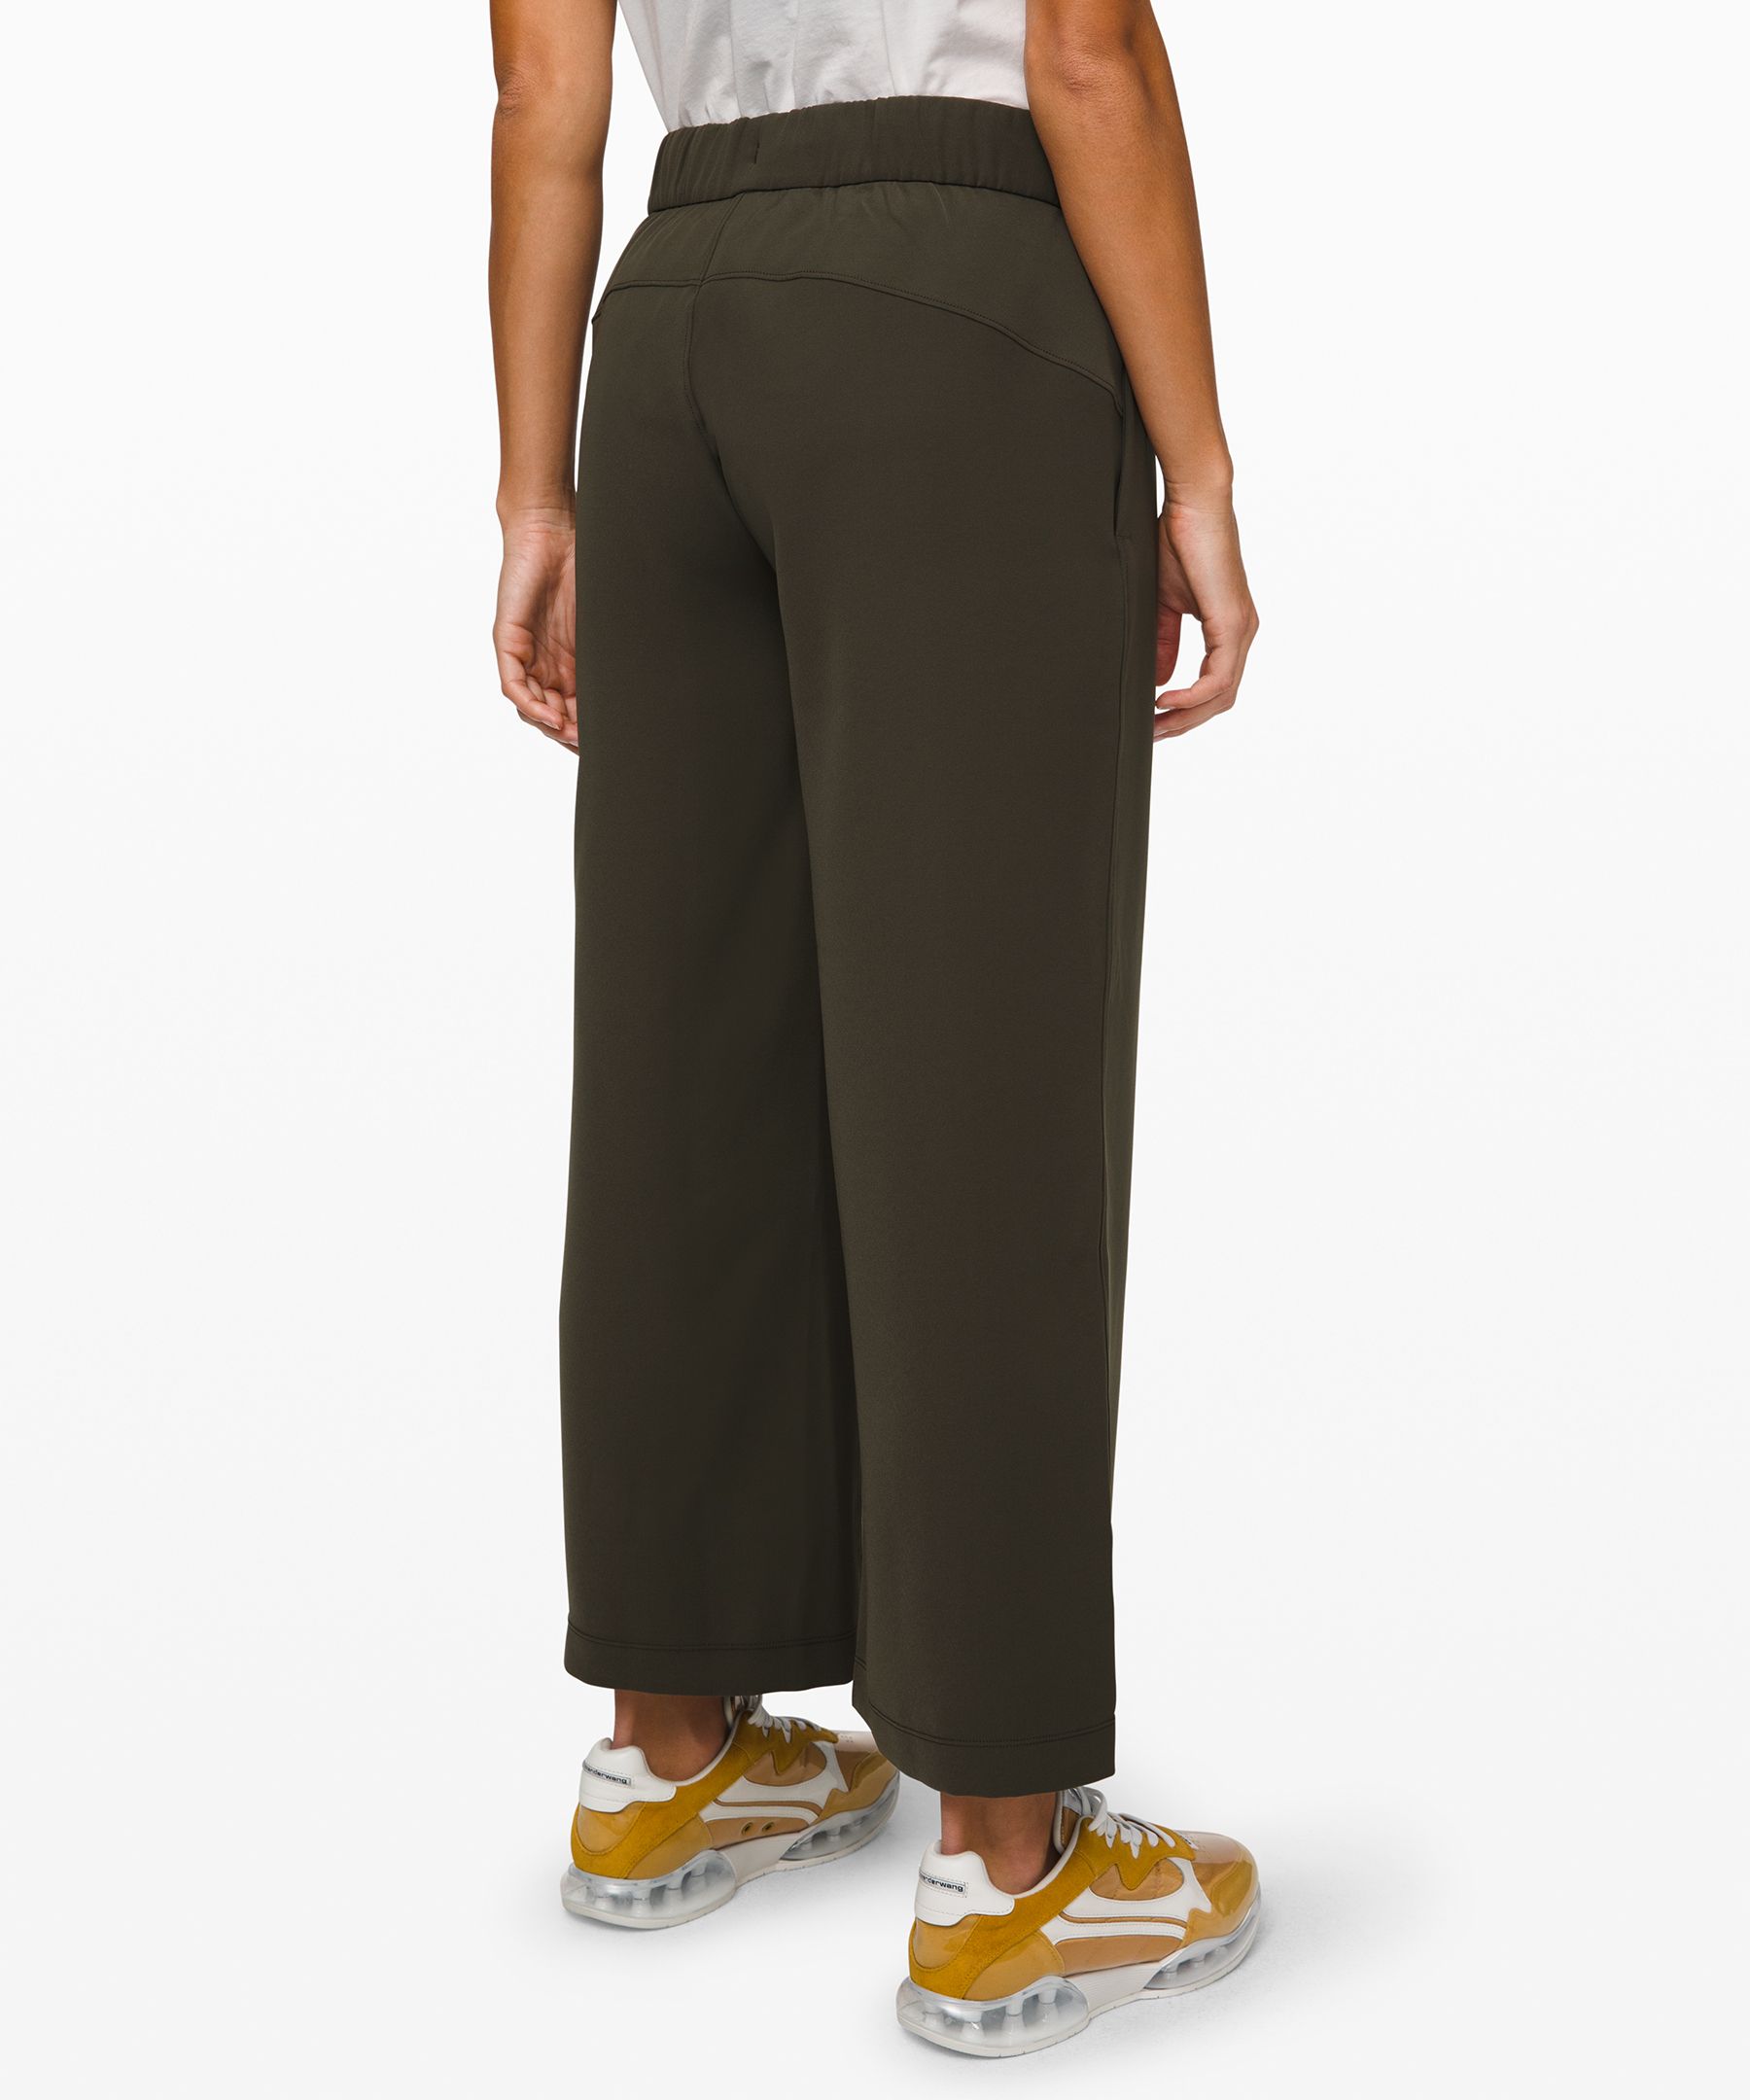 Lululemon On The Fly Pant *Woven 28 Frontier